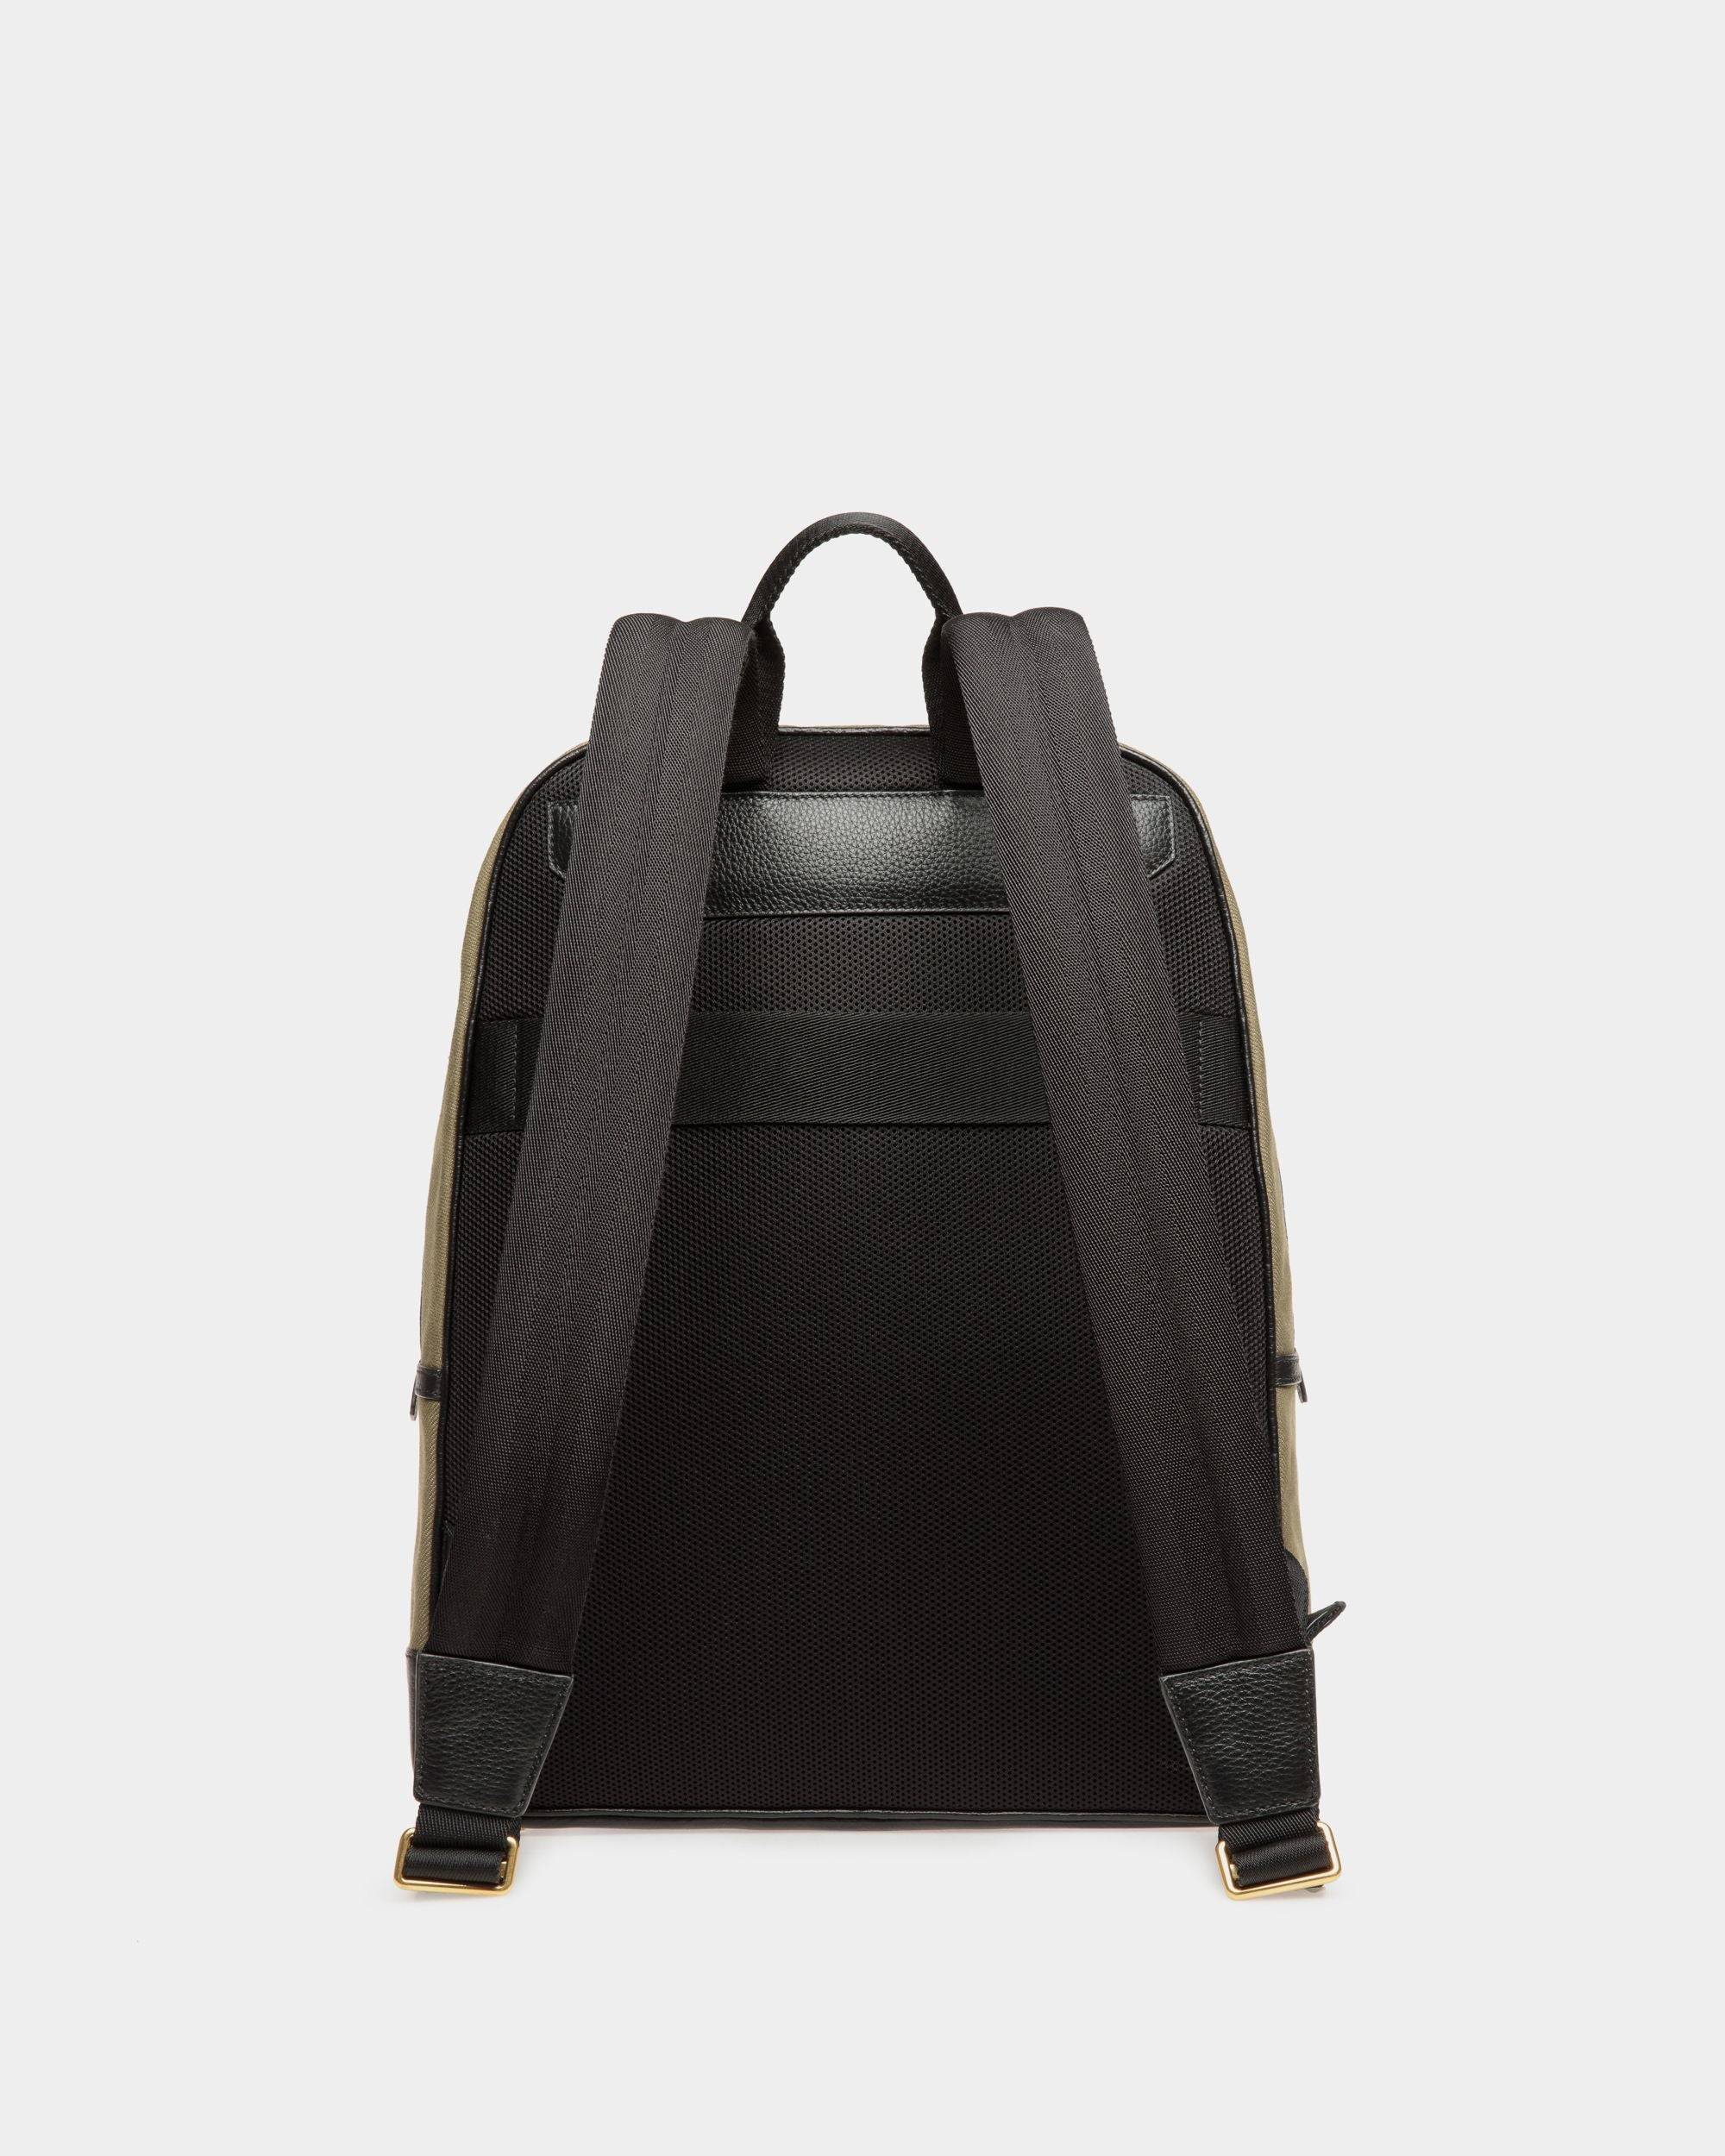 Bar | Men's Backpack in Green Canvas And Black Leather | Bally | Still Life Back